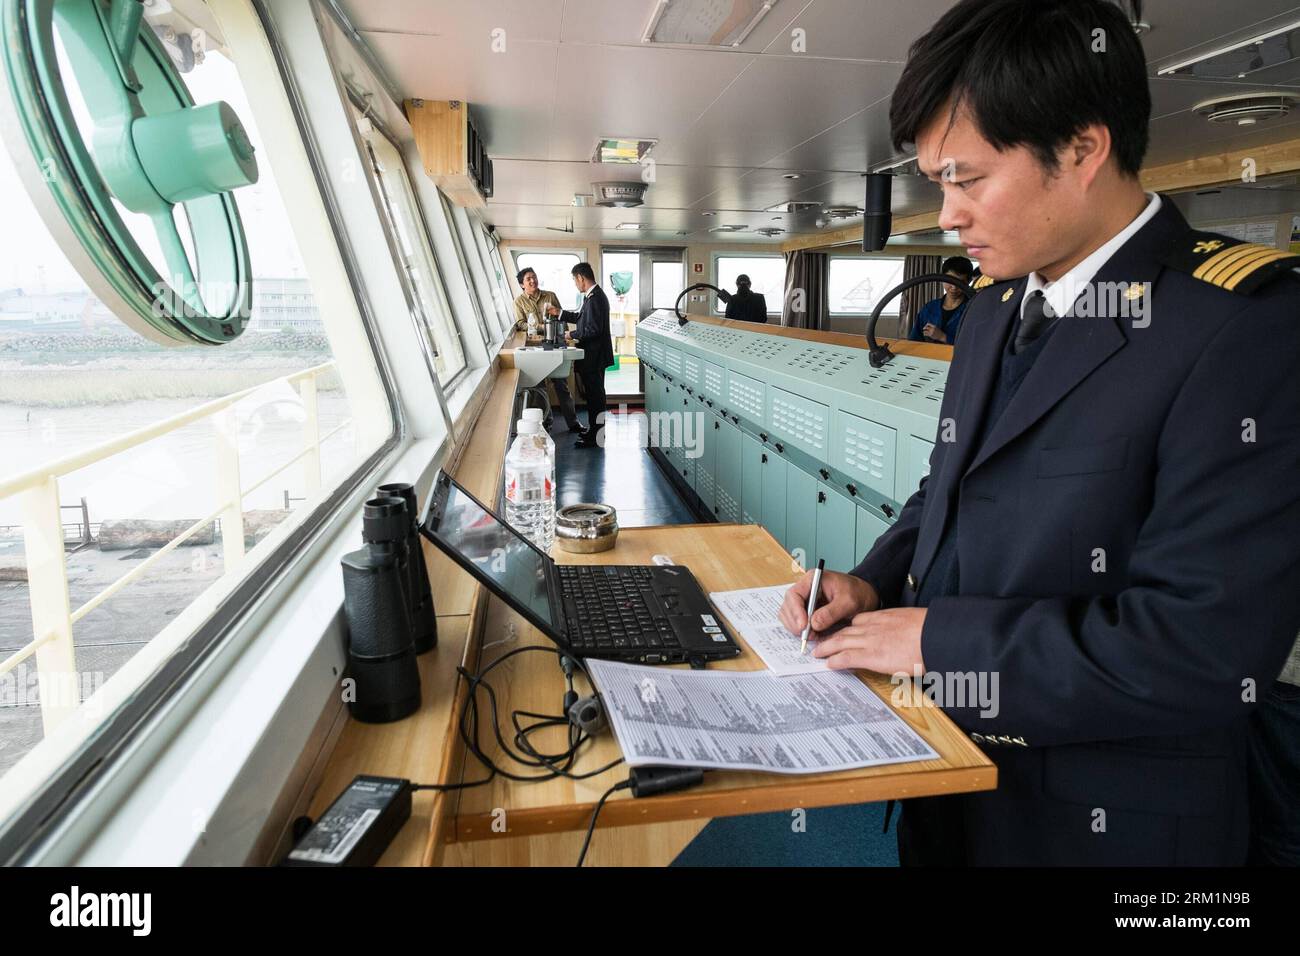 Bildnummer: 59604345  Datum: 24.04.2013  Copyright: imago/Xinhua NANJING, 2013 - Zhu Hui notes down Maple Star s technical data before setting sail from the port of Jingjiang in east China s Jiangsu Province, April 24, 2013. Wang Lianmiao and Zhu Hui arrived at the port of Jingjiang on the morning of April 24, 2013. Both men are inland waterway pilots from the Yangtze River Pilot Centre. Awaiting them was the Maple Star, a 180-meter-long Marshall Islands-flagged cargo ship with a gross register tonnage of over 23,000. Under their pilotage, the Maple Star was to veer 180 degrees and head downst Stock Photo